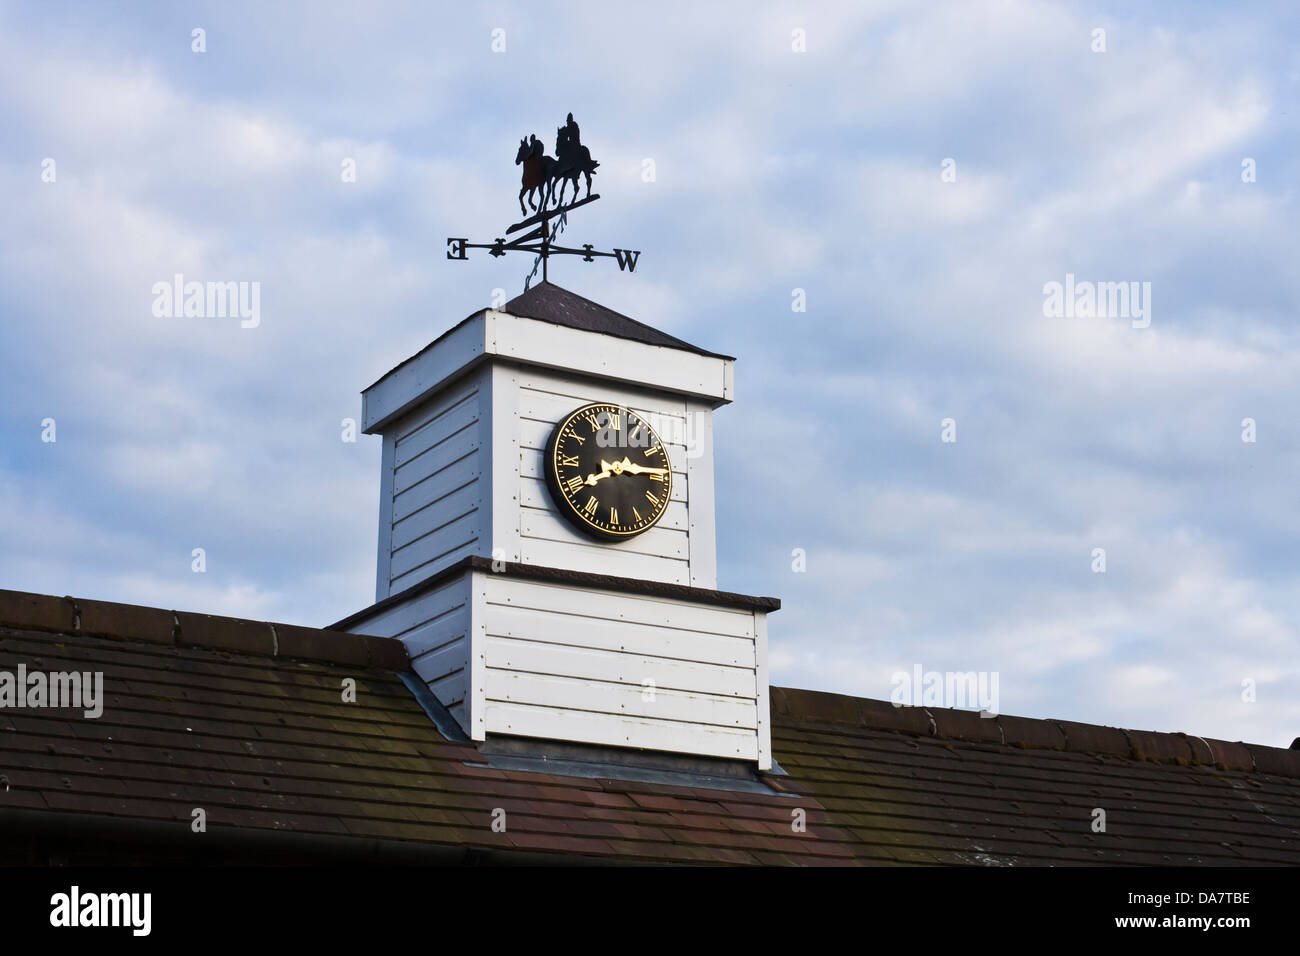 A weather vane with a racehorse motif sits atop a clock tower on the roof of a building in a stud. Stock Photo